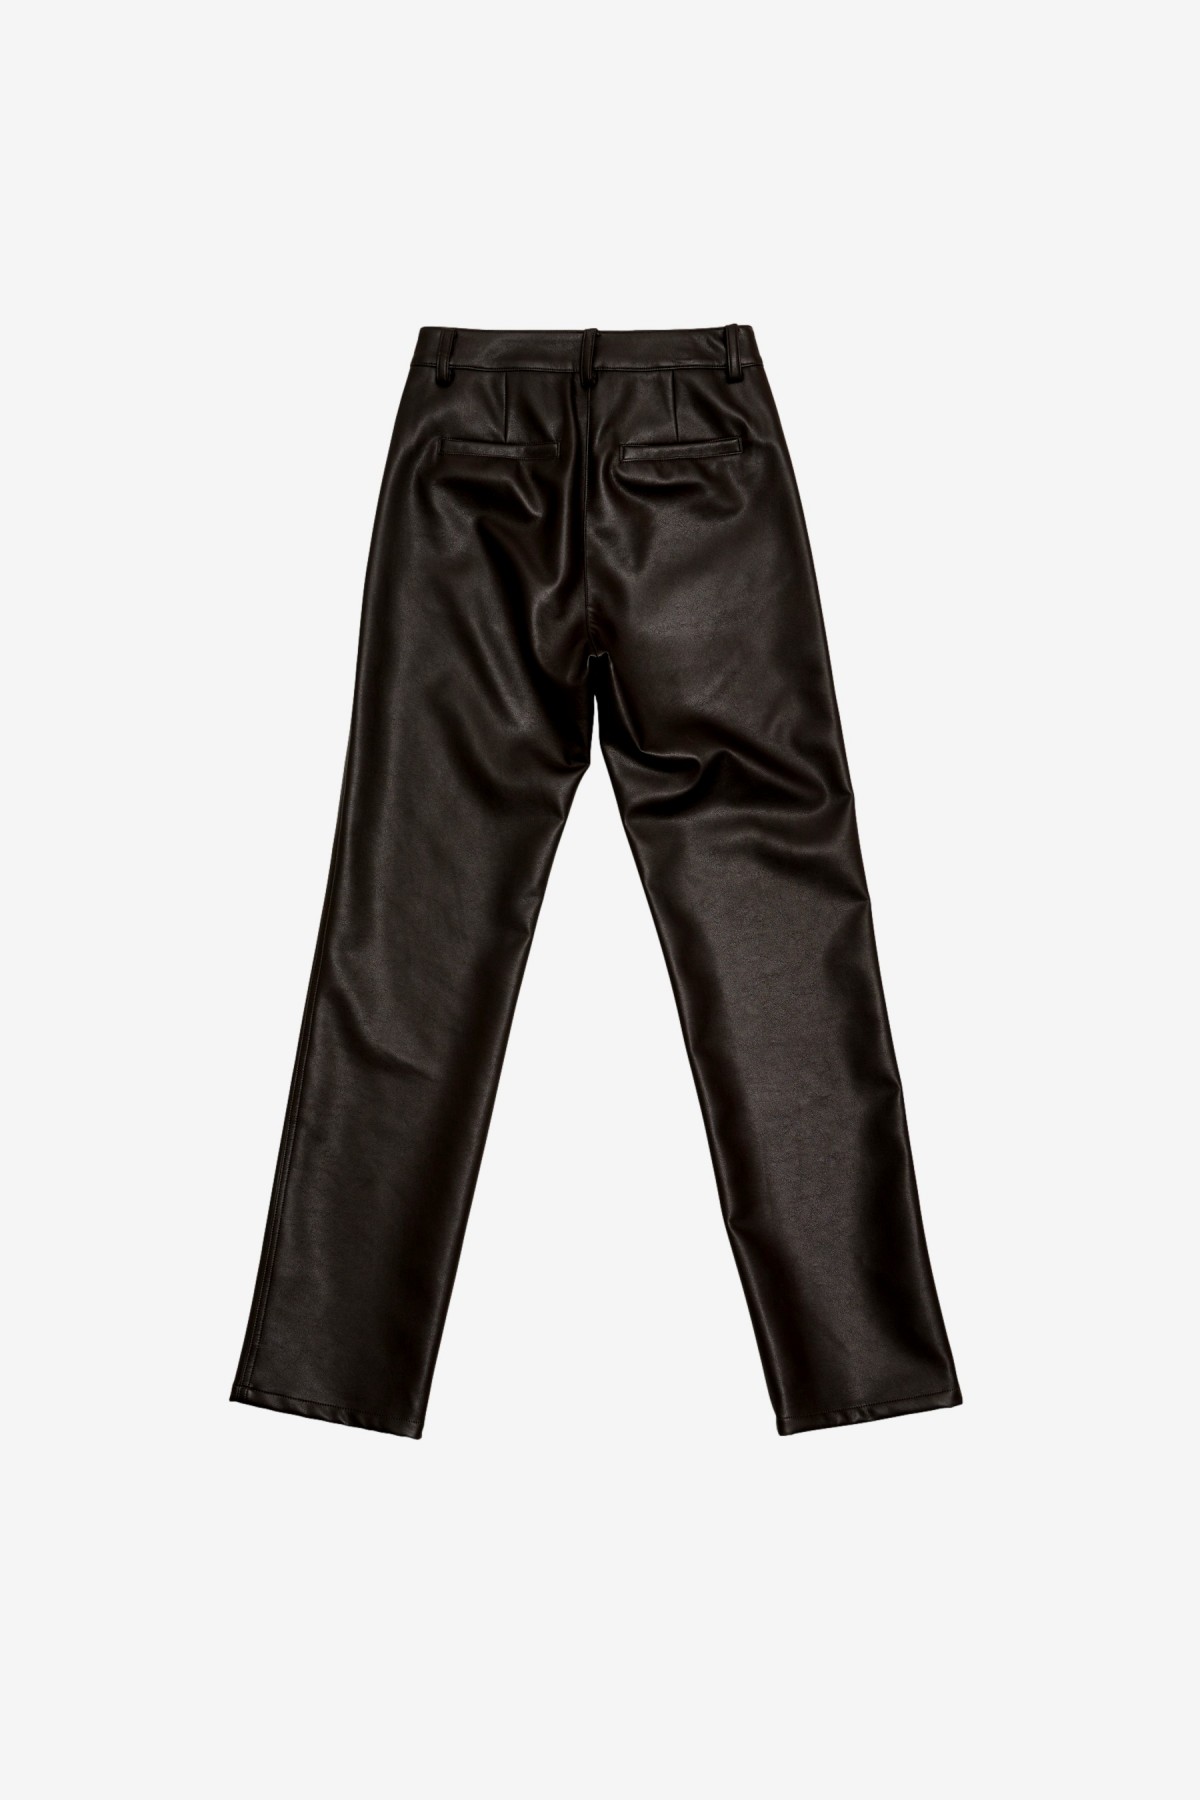 Amomento Vegan Leather Straight Pants in Brown